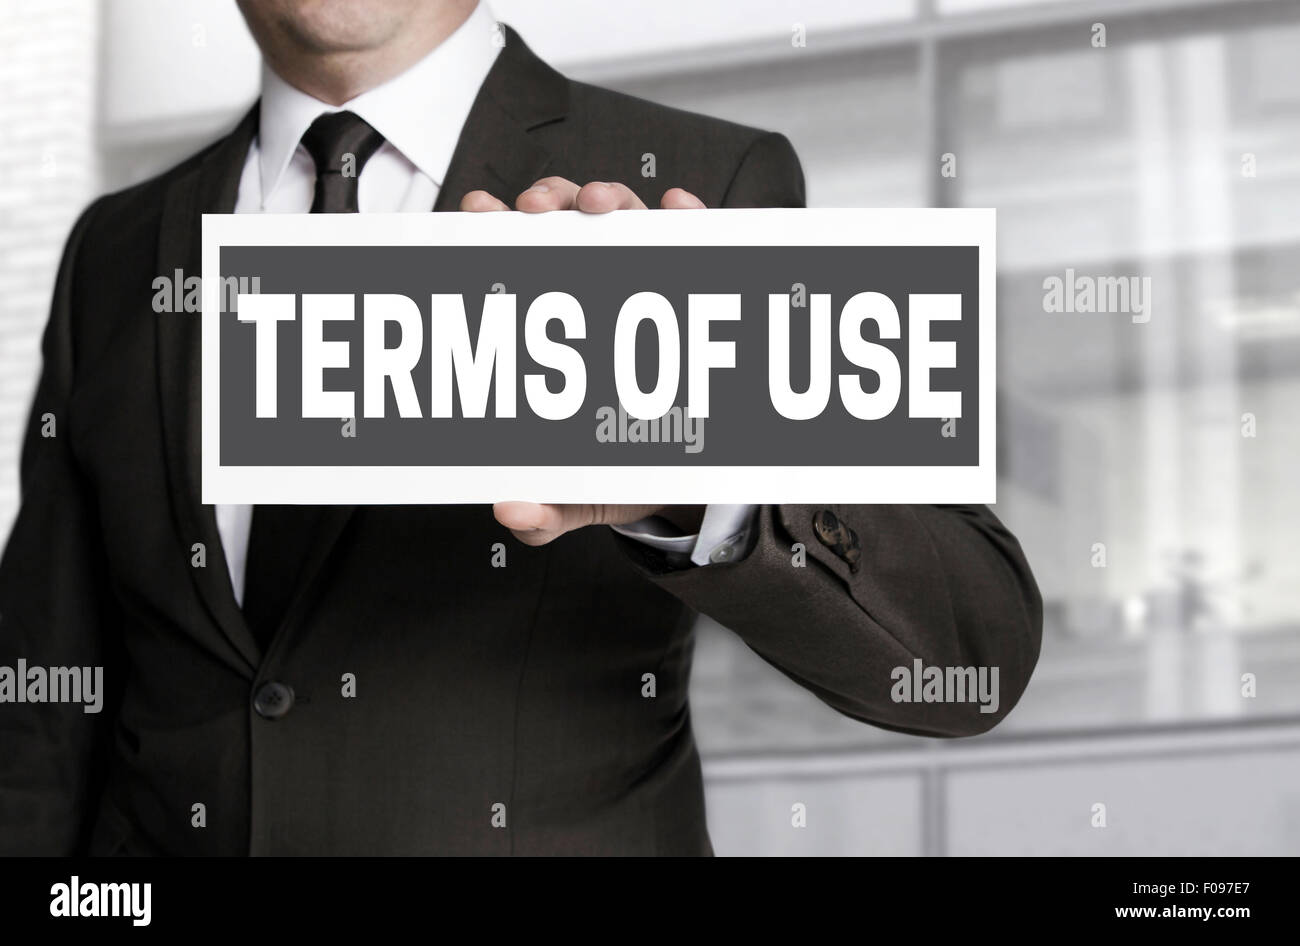 Terms of Use sign is held by businessman. Stock Photo